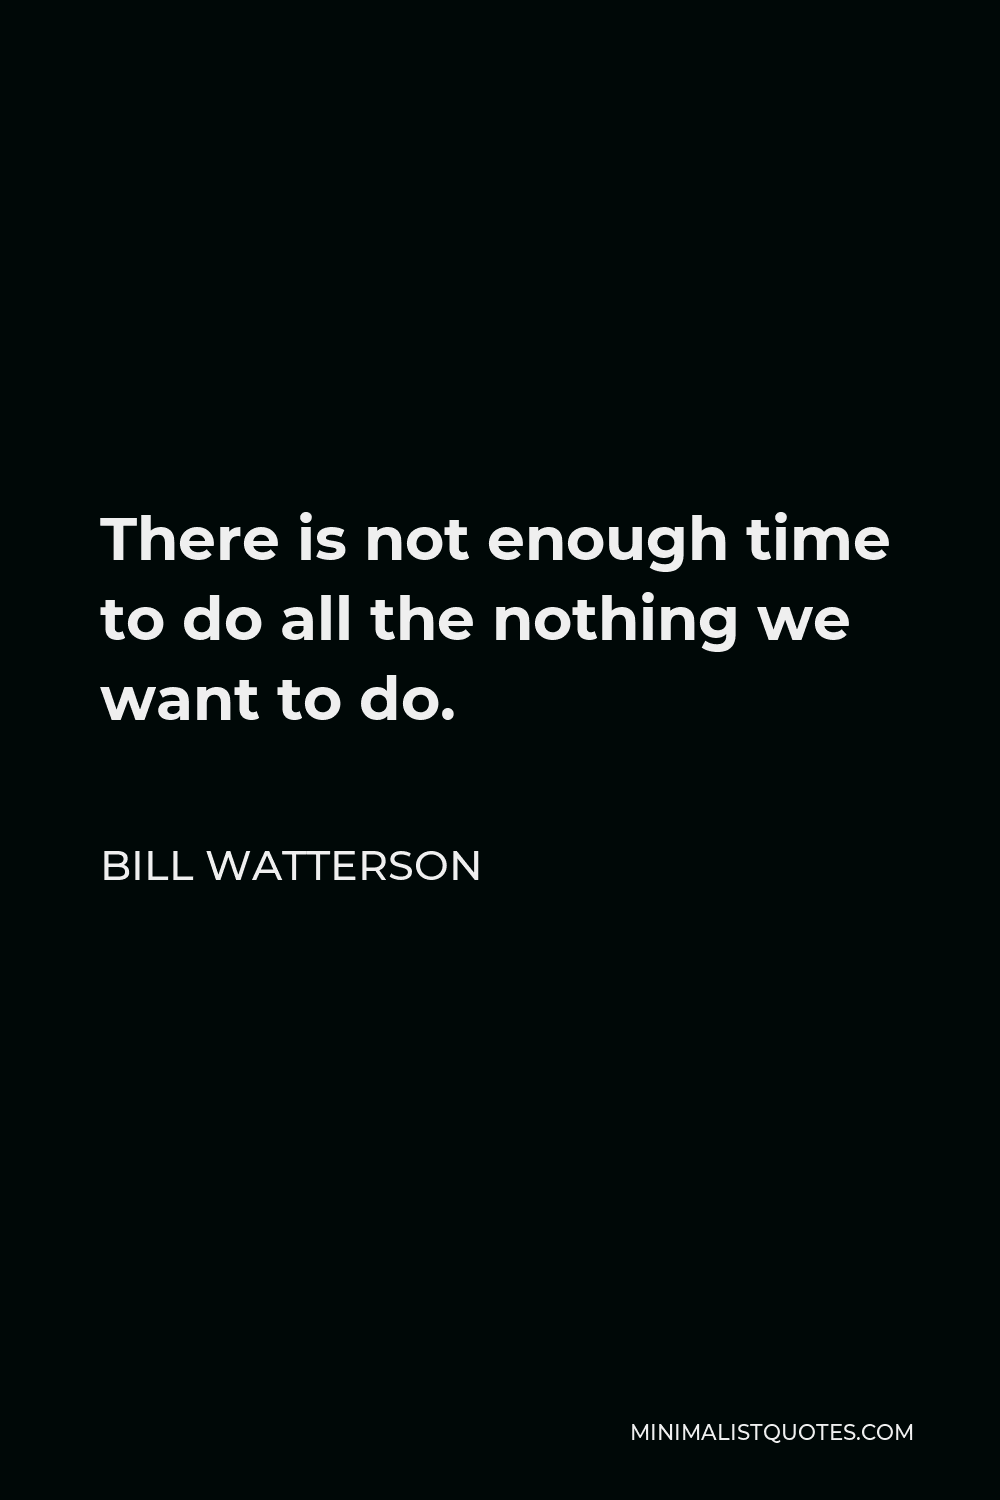 Bill Watterson Quote - There is not enough time to do all the nothing we want to do.